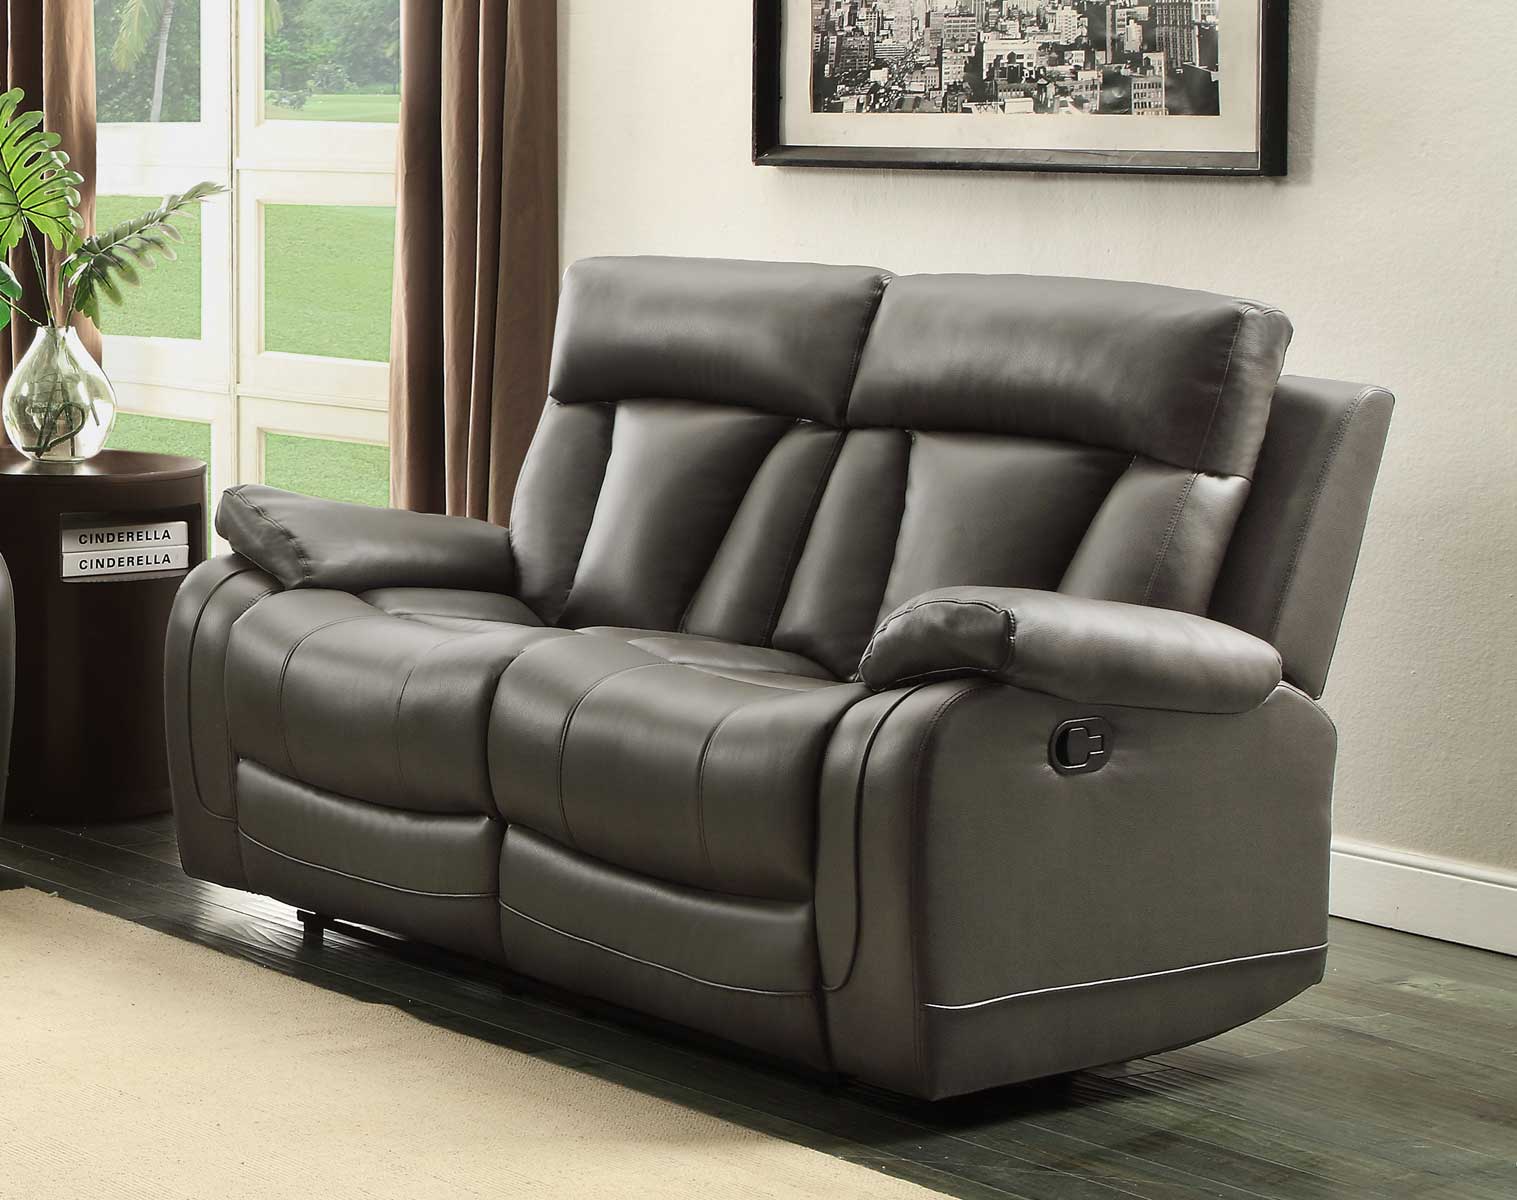 Homelegance Ackerman Double Reclining Love Seat - Grey Bonded Leather Match